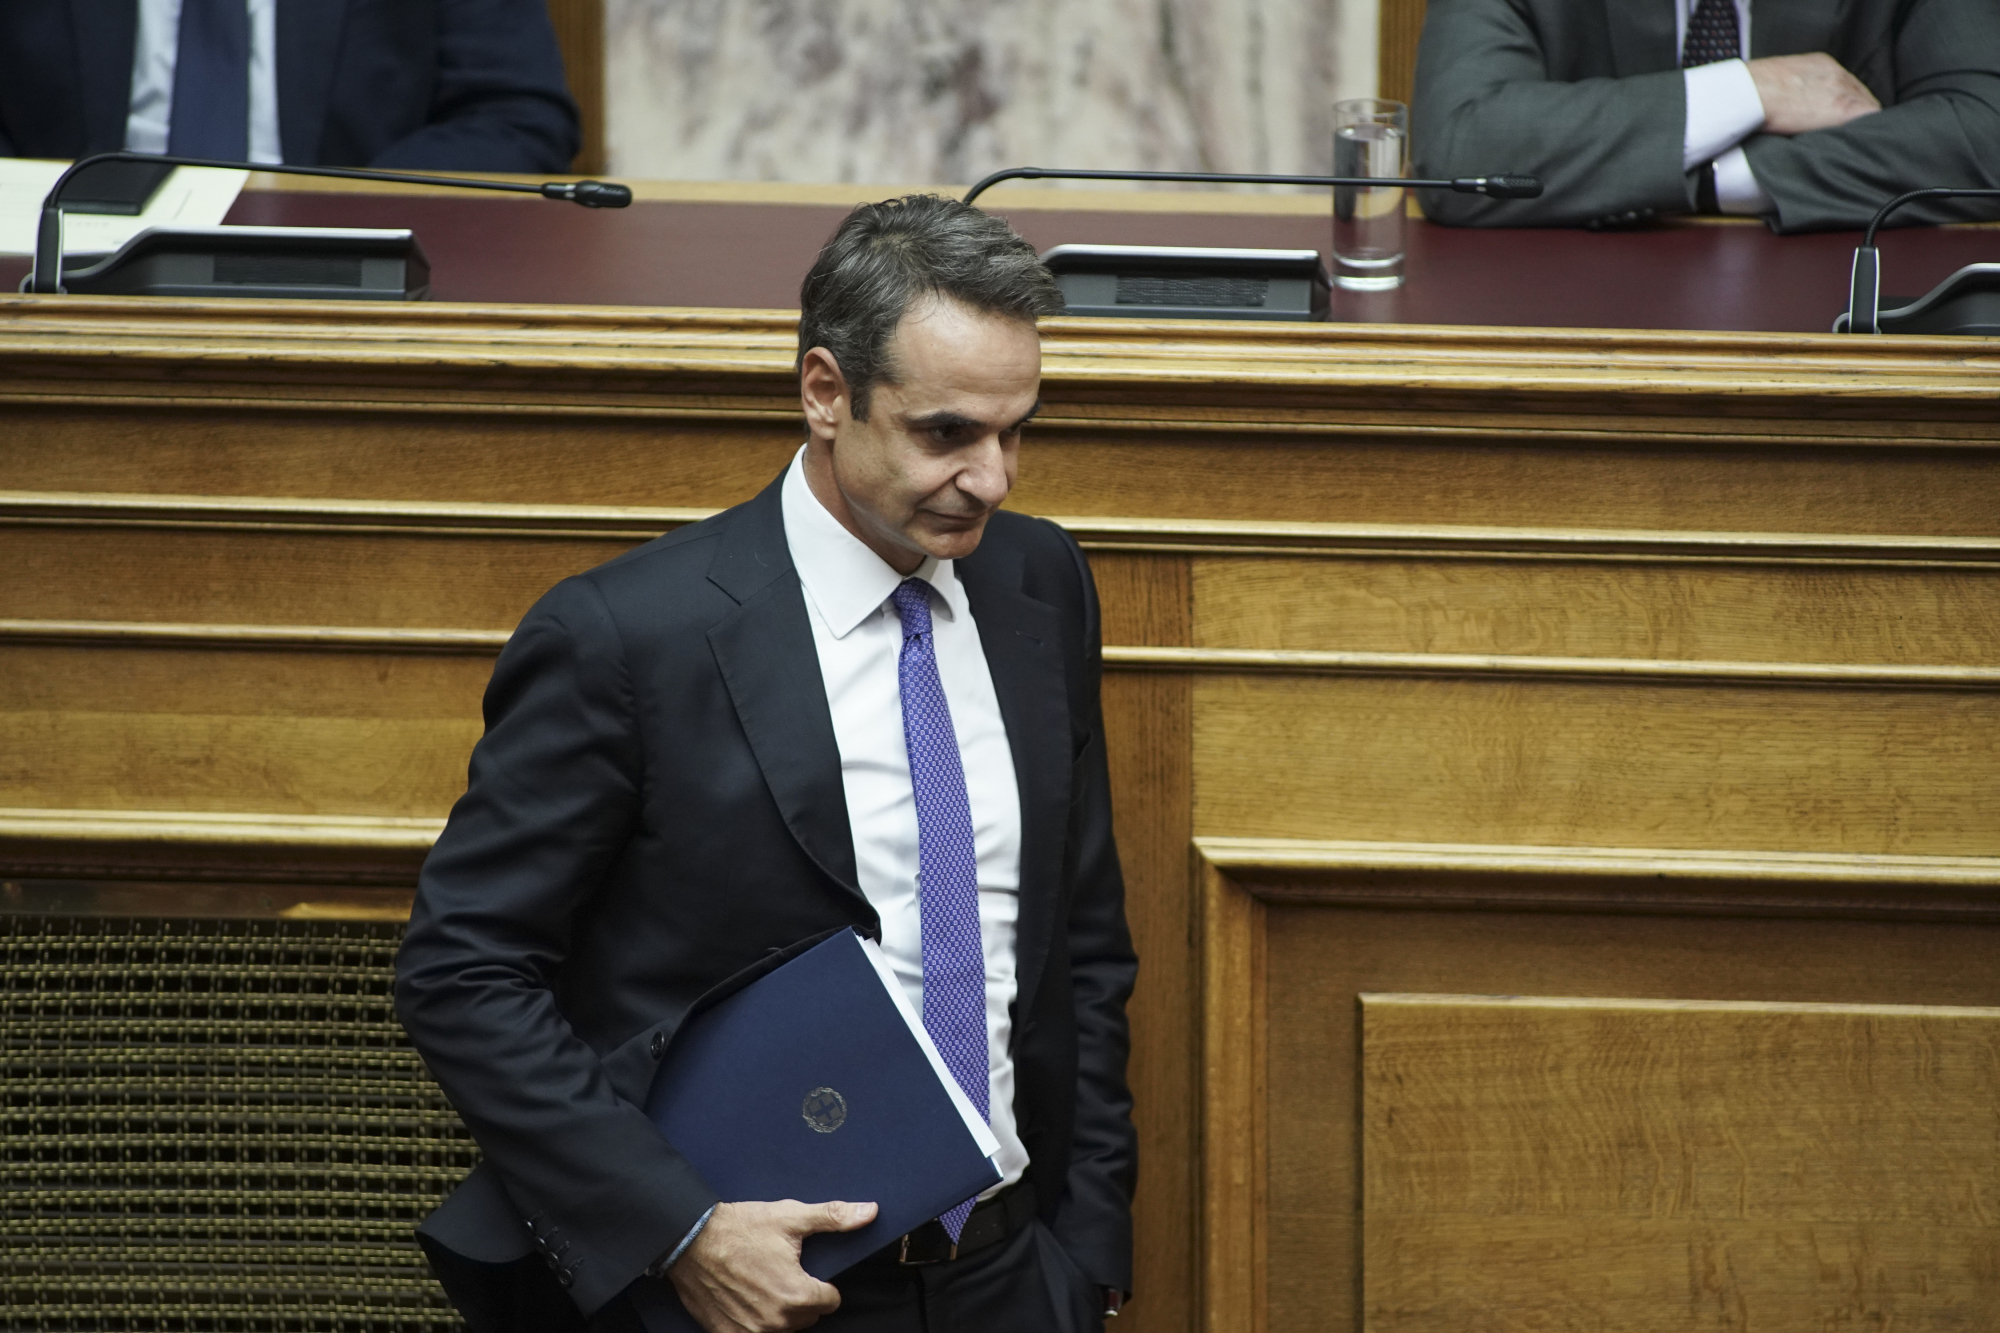 Motion of censure: Mitsotakis brings three “files” to the political clash in Greek Parliament